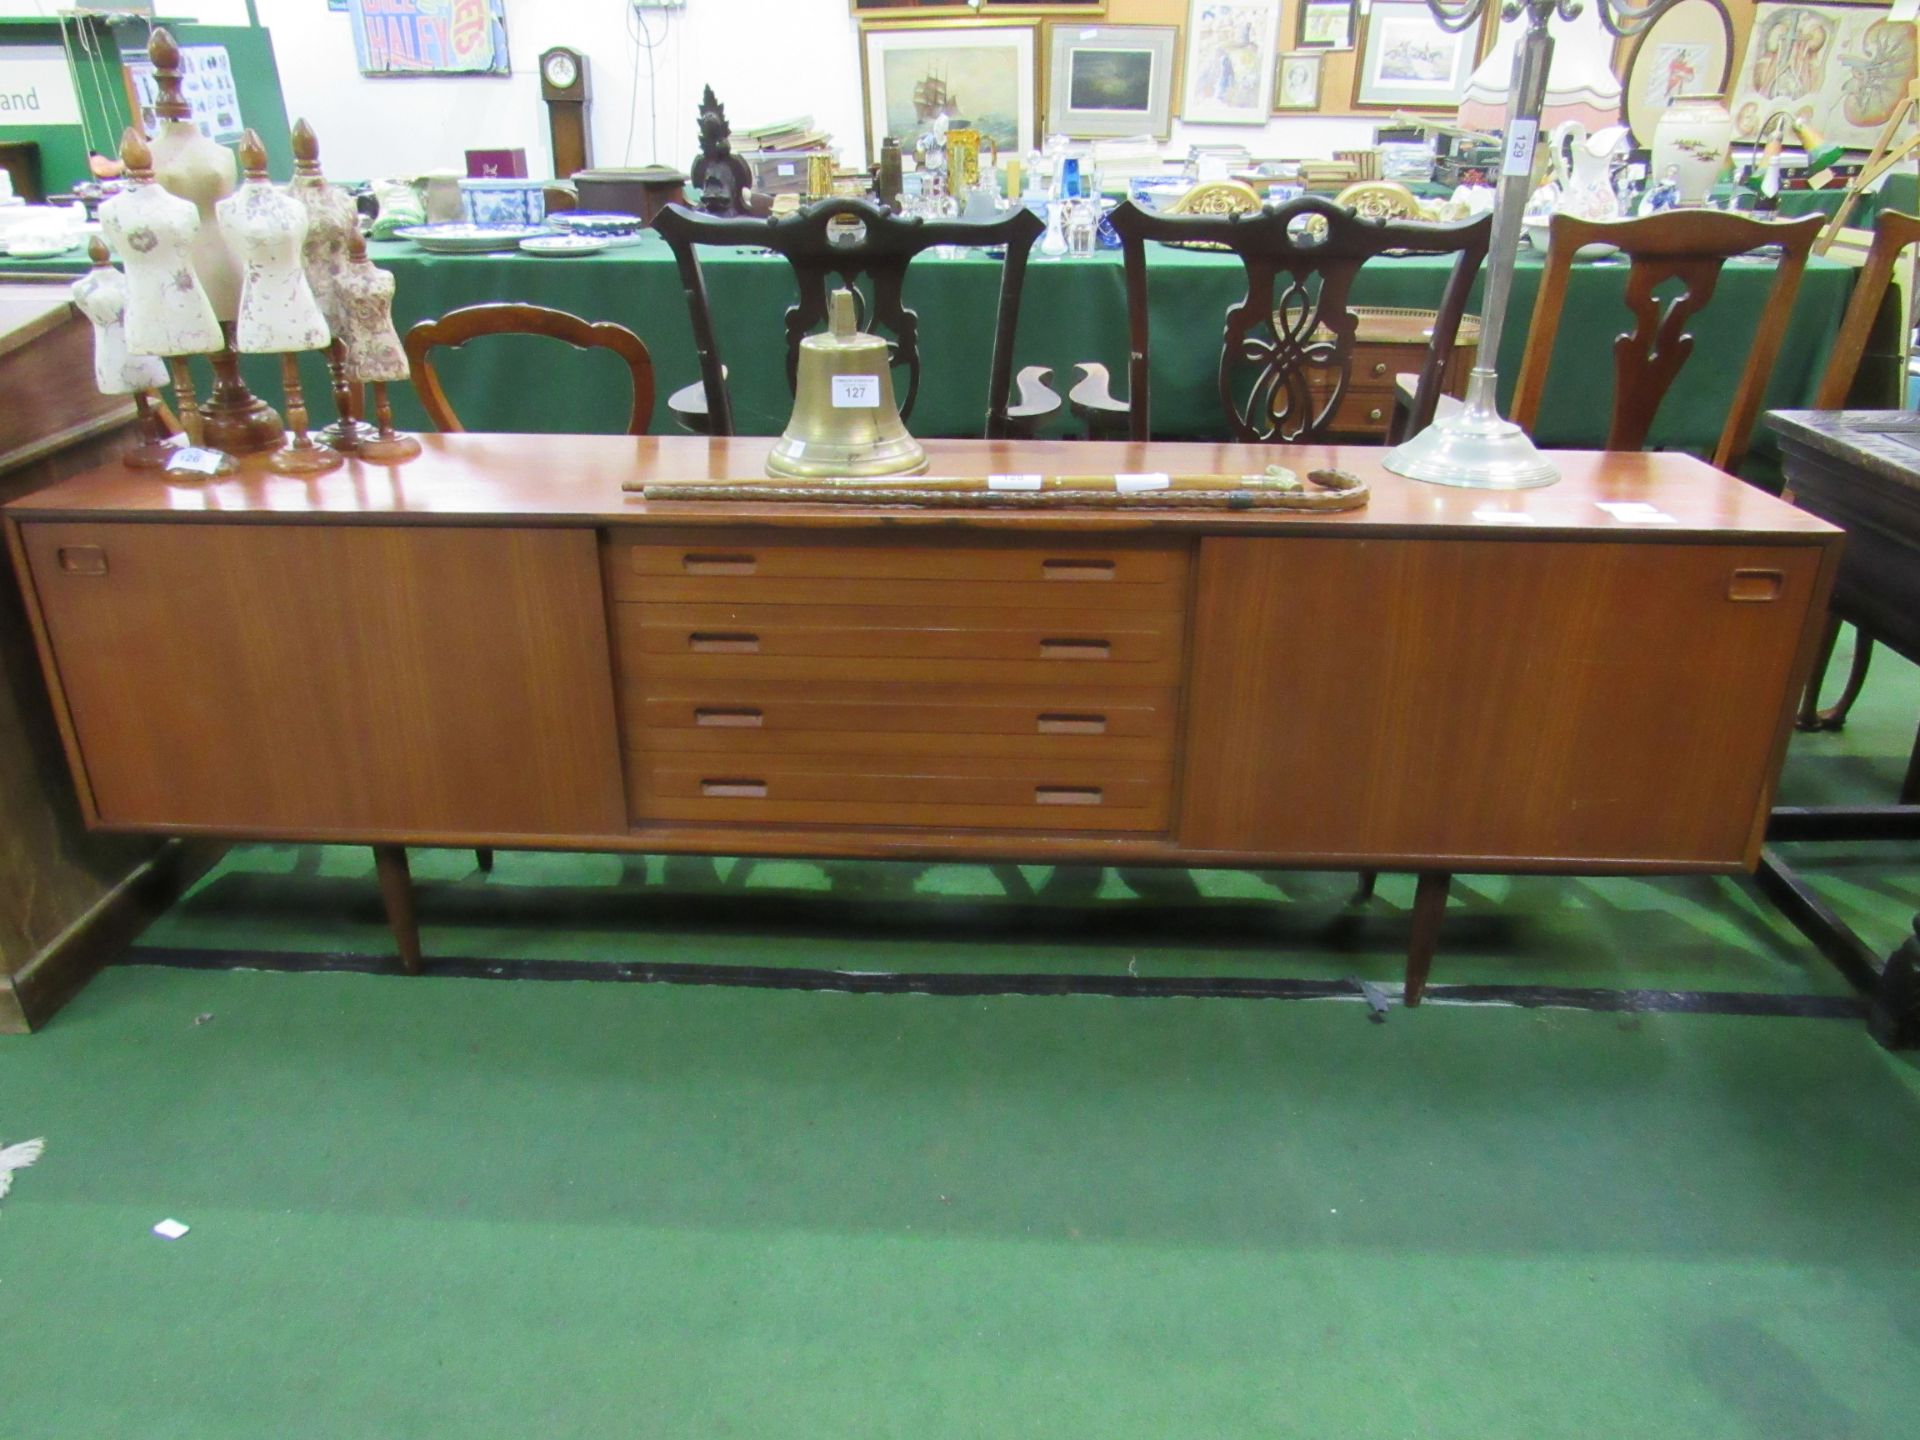 Teak sideboard with 4 centre drawers flanked by cupboards, 222 x 43 x 72cms. Estimate £80-120.